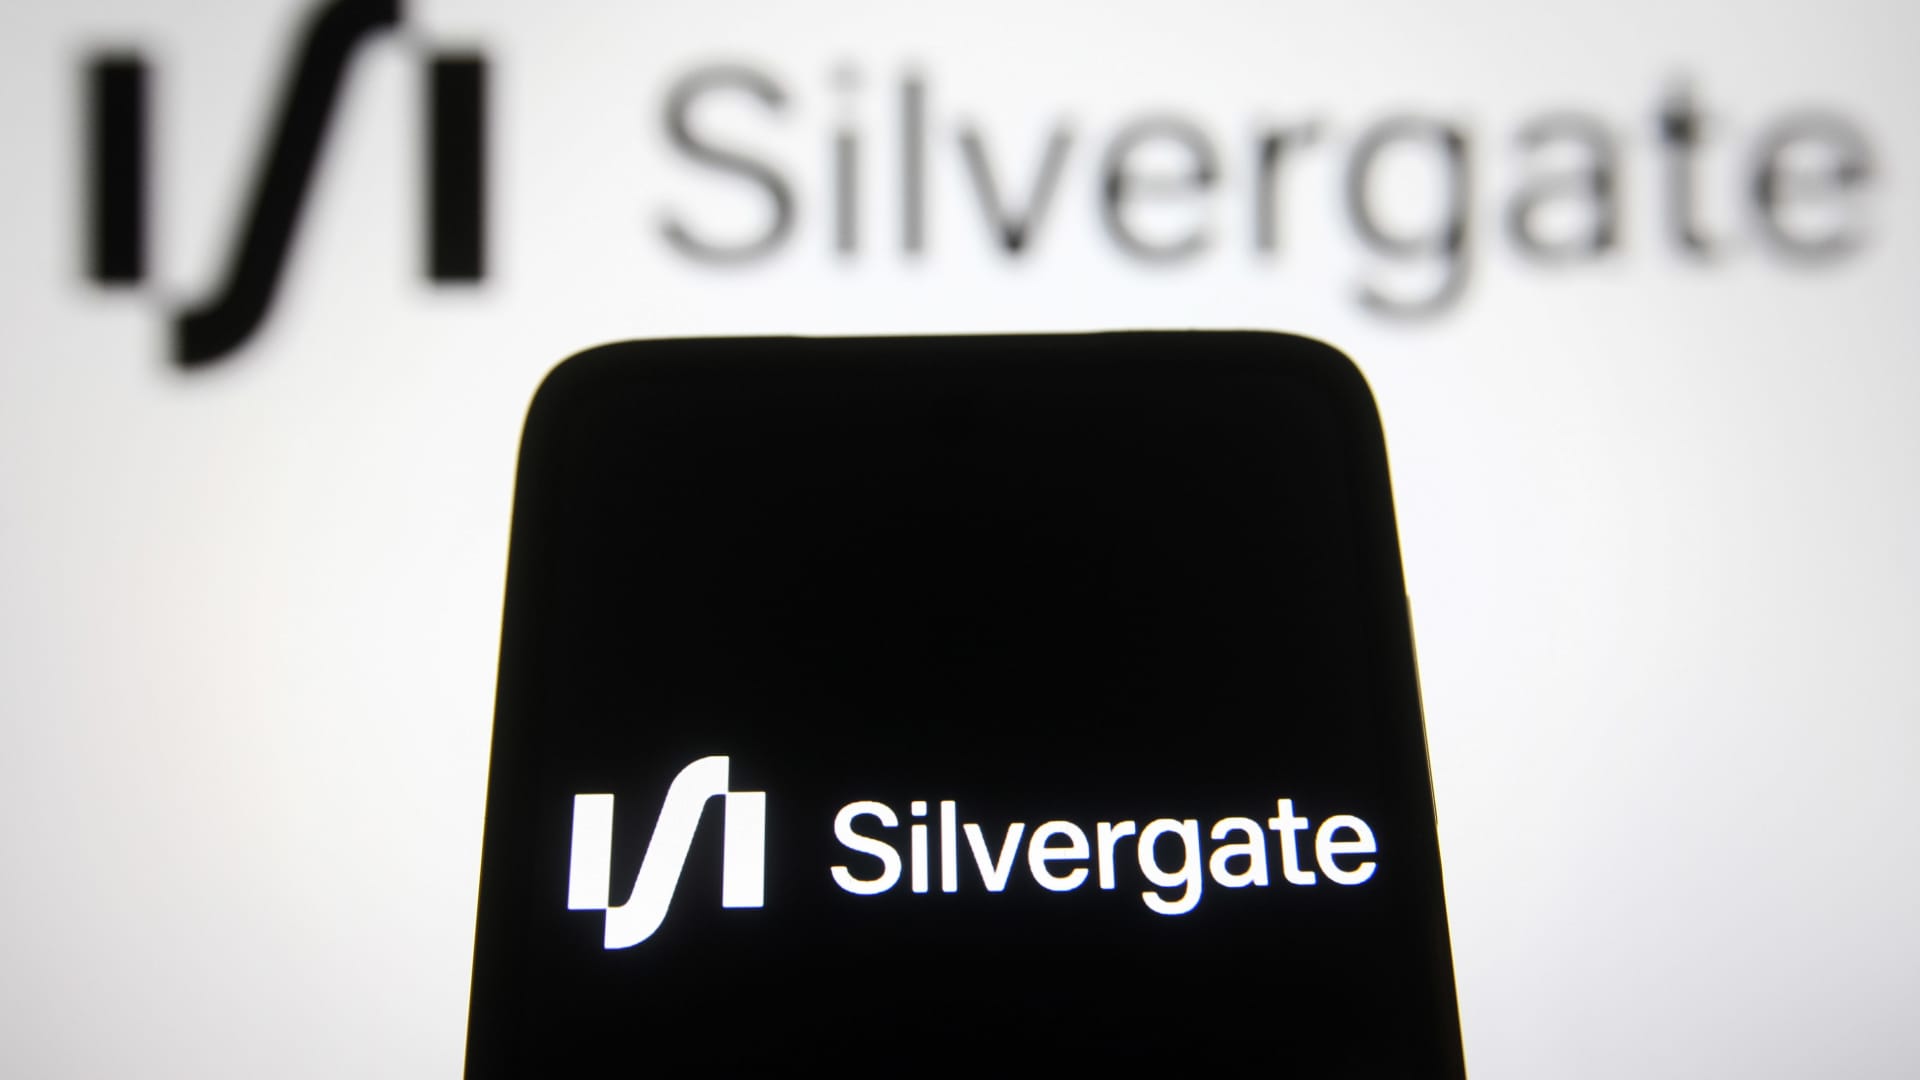 Silvergate Capital tanks nearly 40% after crypto bank discloses massive Q4 withdrawals